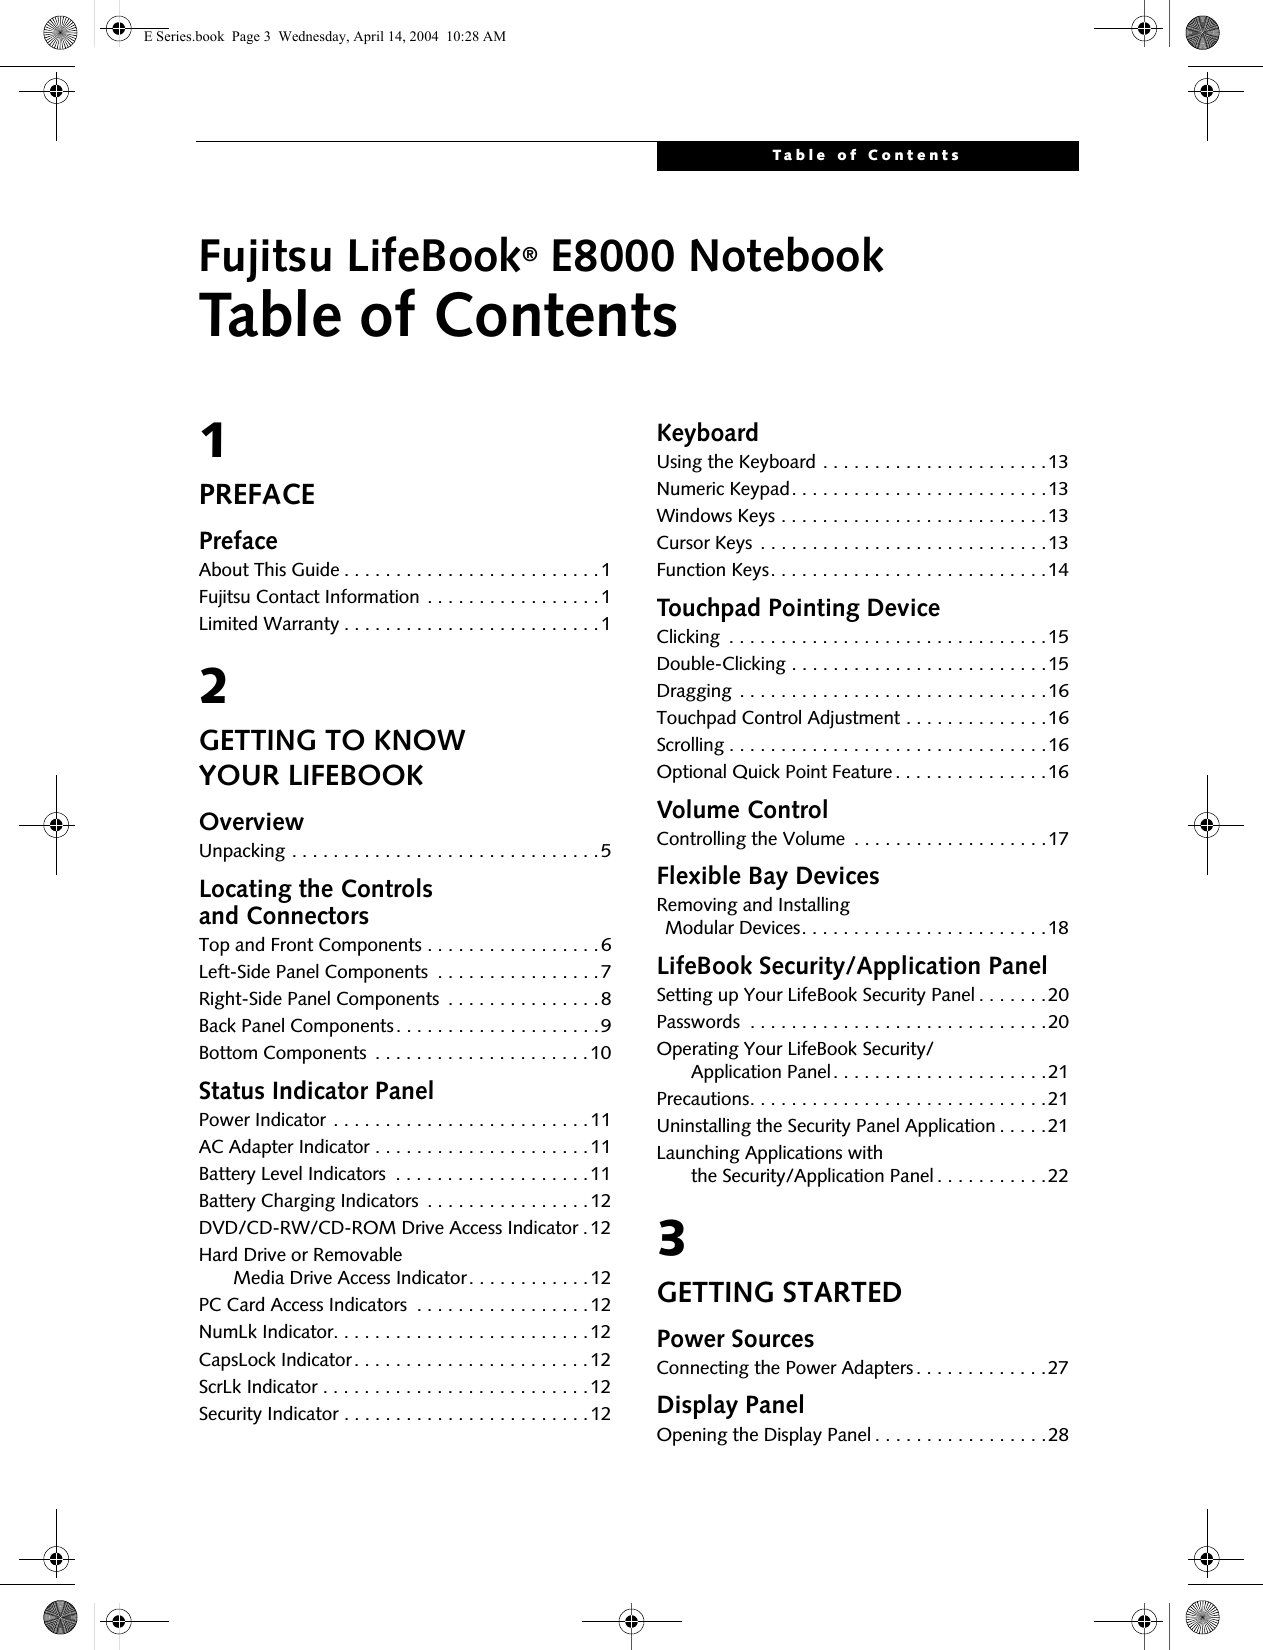 Table of ContentsFujitsu LifeBook® E8000 NotebookTable of Contents1PREFACEPrefaceAbout This Guide . . . . . . . . . . . . . . . . . . . . . . . . .1Fujitsu Contact Information . . . . . . . . . . . . . . . . .1Limited Warranty . . . . . . . . . . . . . . . . . . . . . . . . .12GETTING TO KNOW YOUR LIFEBOOKOverviewUnpacking . . . . . . . . . . . . . . . . . . . . . . . . . . . . . .5Locating the Controlsand ConnectorsTop and Front Components . . . . . . . . . . . . . . . . .6Left-Side Panel Components  . . . . . . . . . . . . . . . .7Right-Side Panel Components  . . . . . . . . . . . . . . .8Back Panel Components. . . . . . . . . . . . . . . . . . . .9Bottom Components  . . . . . . . . . . . . . . . . . . . . .10Status Indicator PanelPower Indicator . . . . . . . . . . . . . . . . . . . . . . . . .11AC Adapter Indicator . . . . . . . . . . . . . . . . . . . . .11Battery Level Indicators  . . . . . . . . . . . . . . . . . . .11Battery Charging Indicators  . . . . . . . . . . . . . . . .12DVD/CD-RW/CD-ROM Drive Access Indicator .12Hard Drive or Removable     Media Drive Access Indicator. . . . . . . . . . . .12PC Card Access Indicators  . . . . . . . . . . . . . . . . .12NumLk Indicator. . . . . . . . . . . . . . . . . . . . . . . . .12CapsLock Indicator. . . . . . . . . . . . . . . . . . . . . . .12ScrLk Indicator . . . . . . . . . . . . . . . . . . . . . . . . . .12Security Indicator . . . . . . . . . . . . . . . . . . . . . . . .12KeyboardUsing the Keyboard . . . . . . . . . . . . . . . . . . . . . .13Numeric Keypad. . . . . . . . . . . . . . . . . . . . . . . . .13Windows Keys . . . . . . . . . . . . . . . . . . . . . . . . . .13Cursor Keys . . . . . . . . . . . . . . . . . . . . . . . . . . . .13Function Keys. . . . . . . . . . . . . . . . . . . . . . . . . . .14Touchpad Pointing DeviceClicking  . . . . . . . . . . . . . . . . . . . . . . . . . . . . . . .15Double-Clicking . . . . . . . . . . . . . . . . . . . . . . . . .15Dragging . . . . . . . . . . . . . . . . . . . . . . . . . . . . . .16Touchpad Control Adjustment . . . . . . . . . . . . . .16Scrolling . . . . . . . . . . . . . . . . . . . . . . . . . . . . . . .16Optional Quick Point Feature. . . . . . . . . . . . . . .16Volume ControlControlling the Volume  . . . . . . . . . . . . . . . . . . .17Flexible Bay DevicesRemoving and Installing Modular Devices. . . . . . . . . . . . . . . . . . . . . . . .18LifeBook Security/Application PanelSetting up Your LifeBook Security Panel . . . . . . .20Passwords  . . . . . . . . . . . . . . . . . . . . . . . . . . . . .20Operating Your LifeBook Security/      Application Panel. . . . . . . . . . . . . . . . . . . . .21Precautions. . . . . . . . . . . . . . . . . . . . . . . . . . . . .21Uninstalling the Security Panel Application . . . . .21Launching Applications with     the Security/Application Panel . . . . . . . . . . .223GETTING STARTEDPower SourcesConnecting the Power Adapters . . . . . . . . . . . . .27Display PanelOpening the Display Panel . . . . . . . . . . . . . . . . .28E Series.book  Page 3  Wednesday, April 14, 2004  10:28 AM